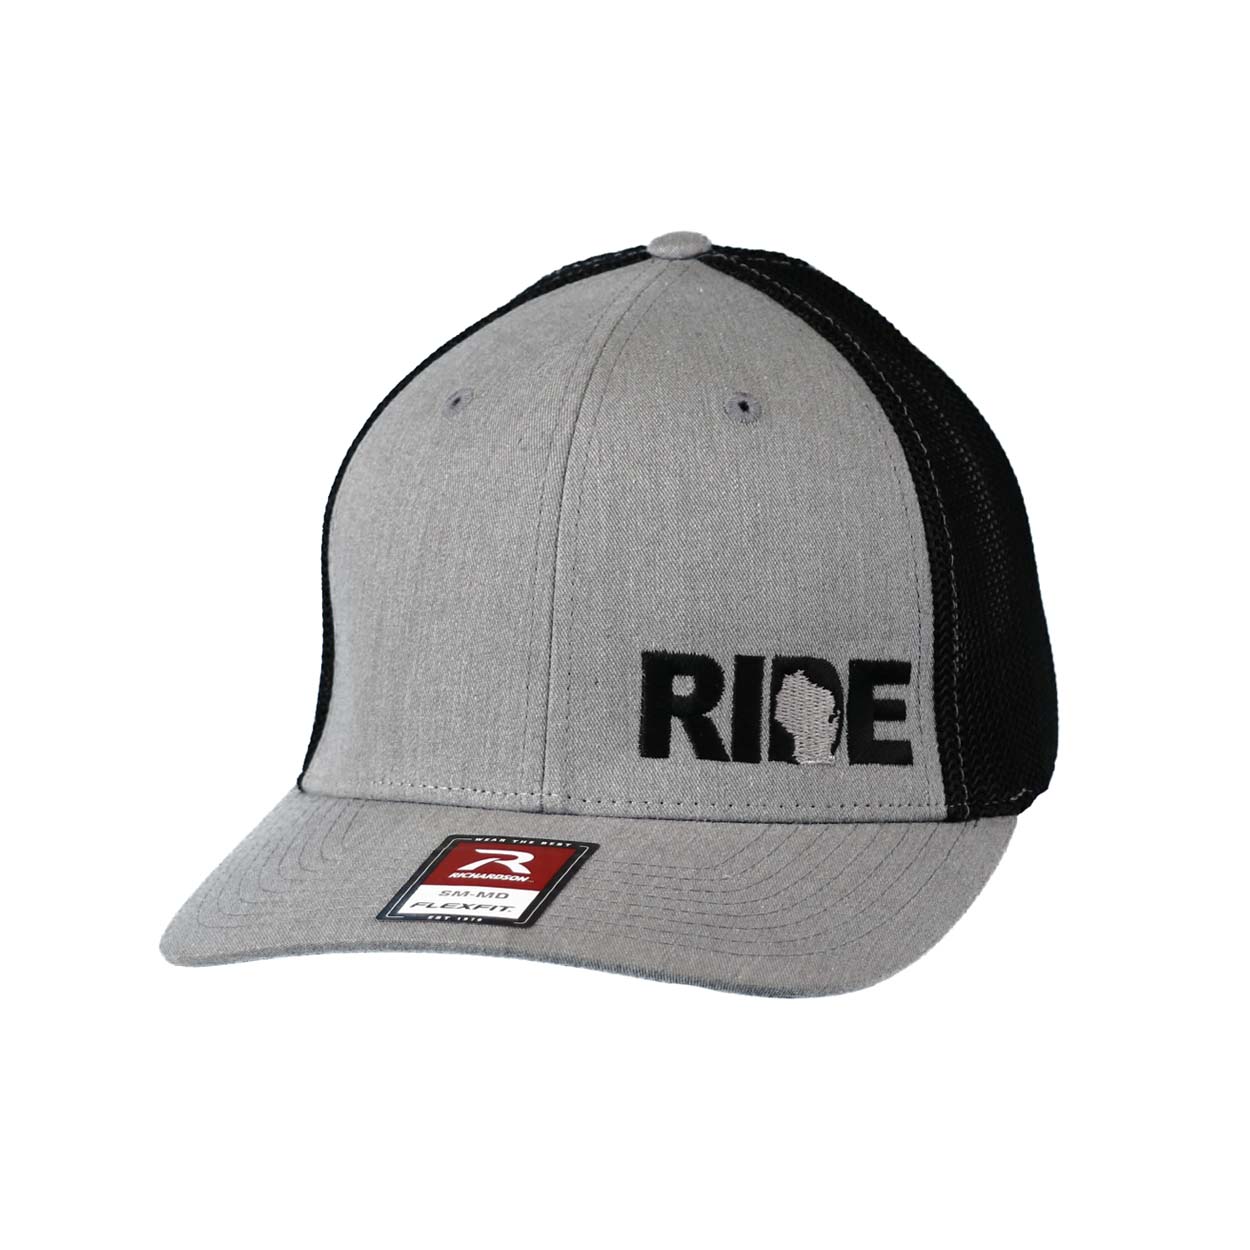 Ride Wisconsin Night Out Embroidered Flex Fit Mesh Hat Heather Gray/Black